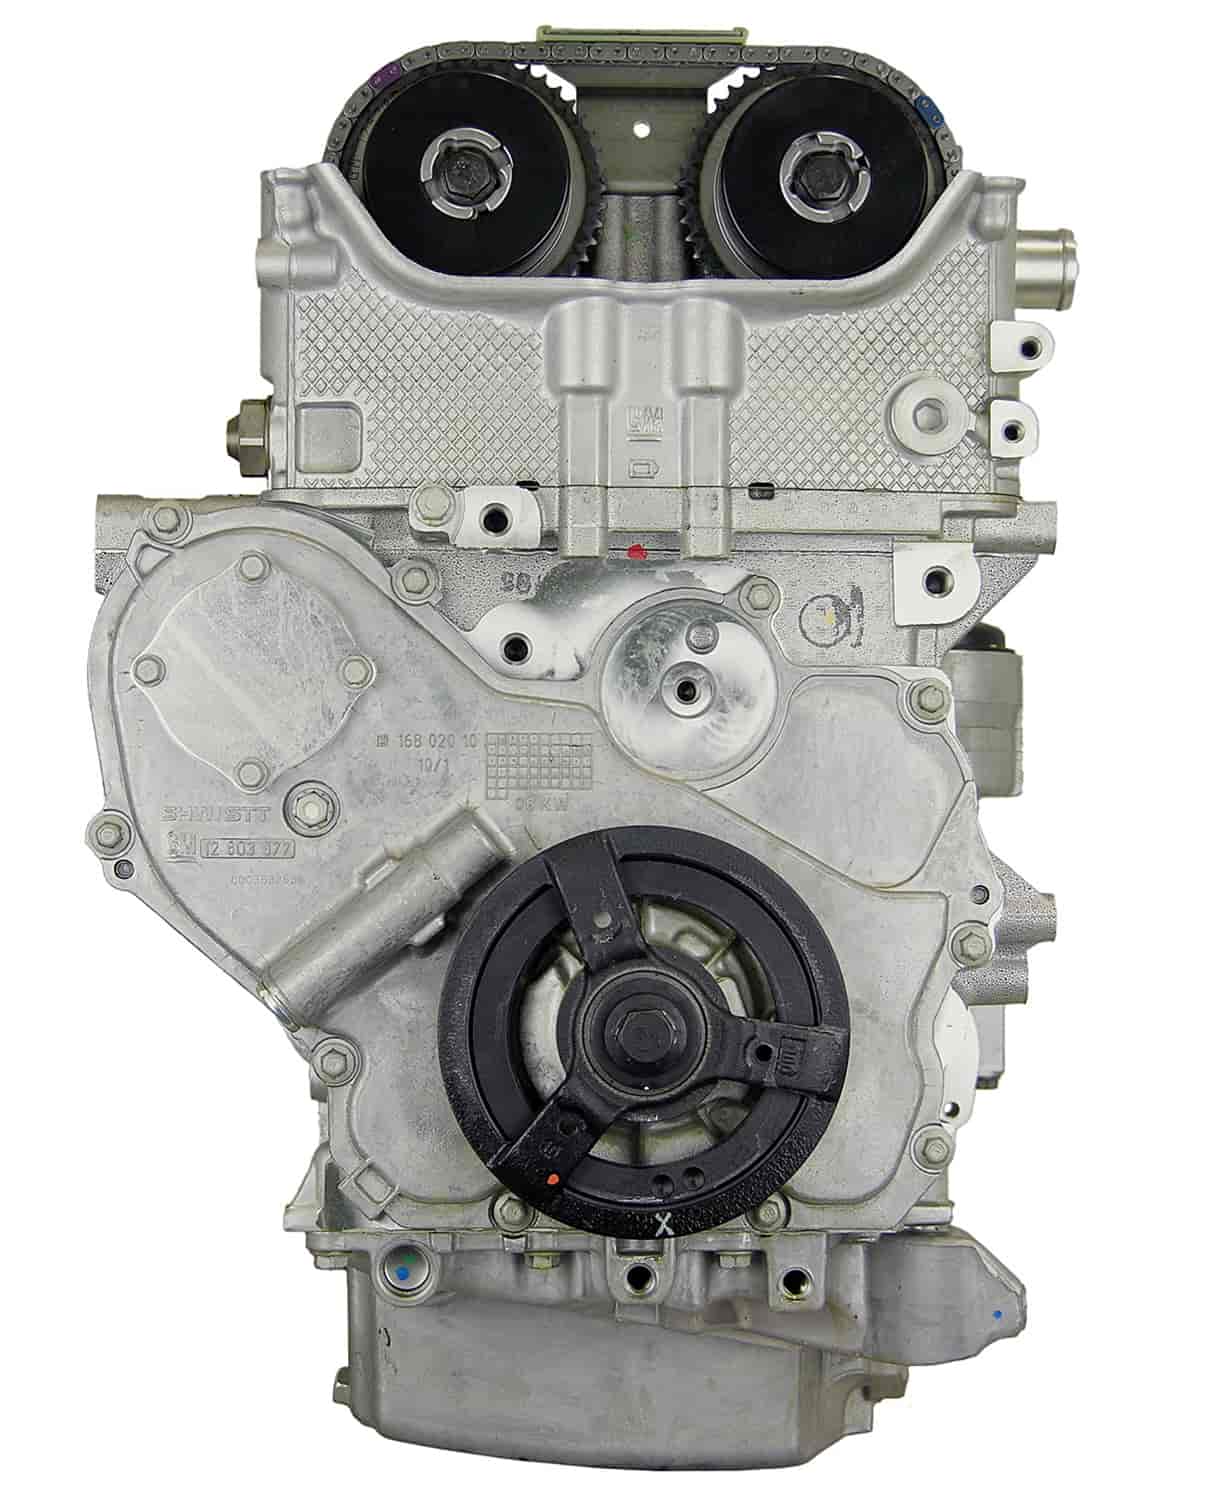 Remanufactured Crate Engine for 2006-2008 Chevy/Pontiac/Saturn Car with 2.4L L4